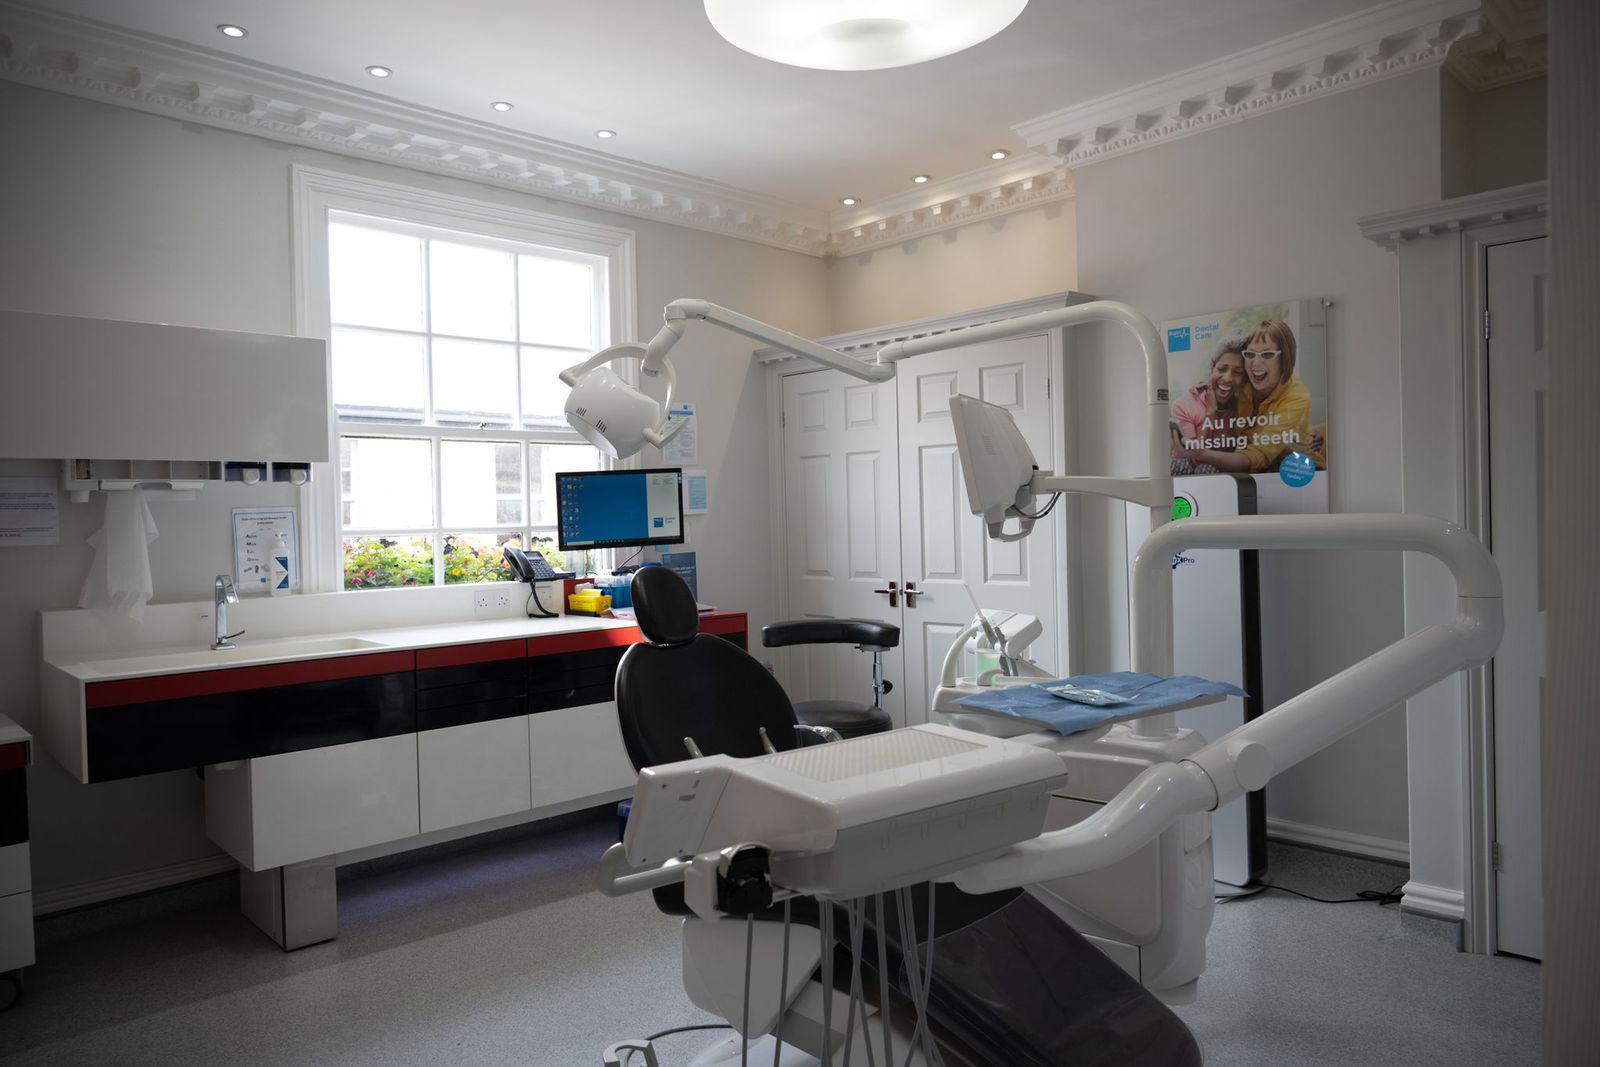 Images Bupa Dental Care Bolton, Silverwell Street